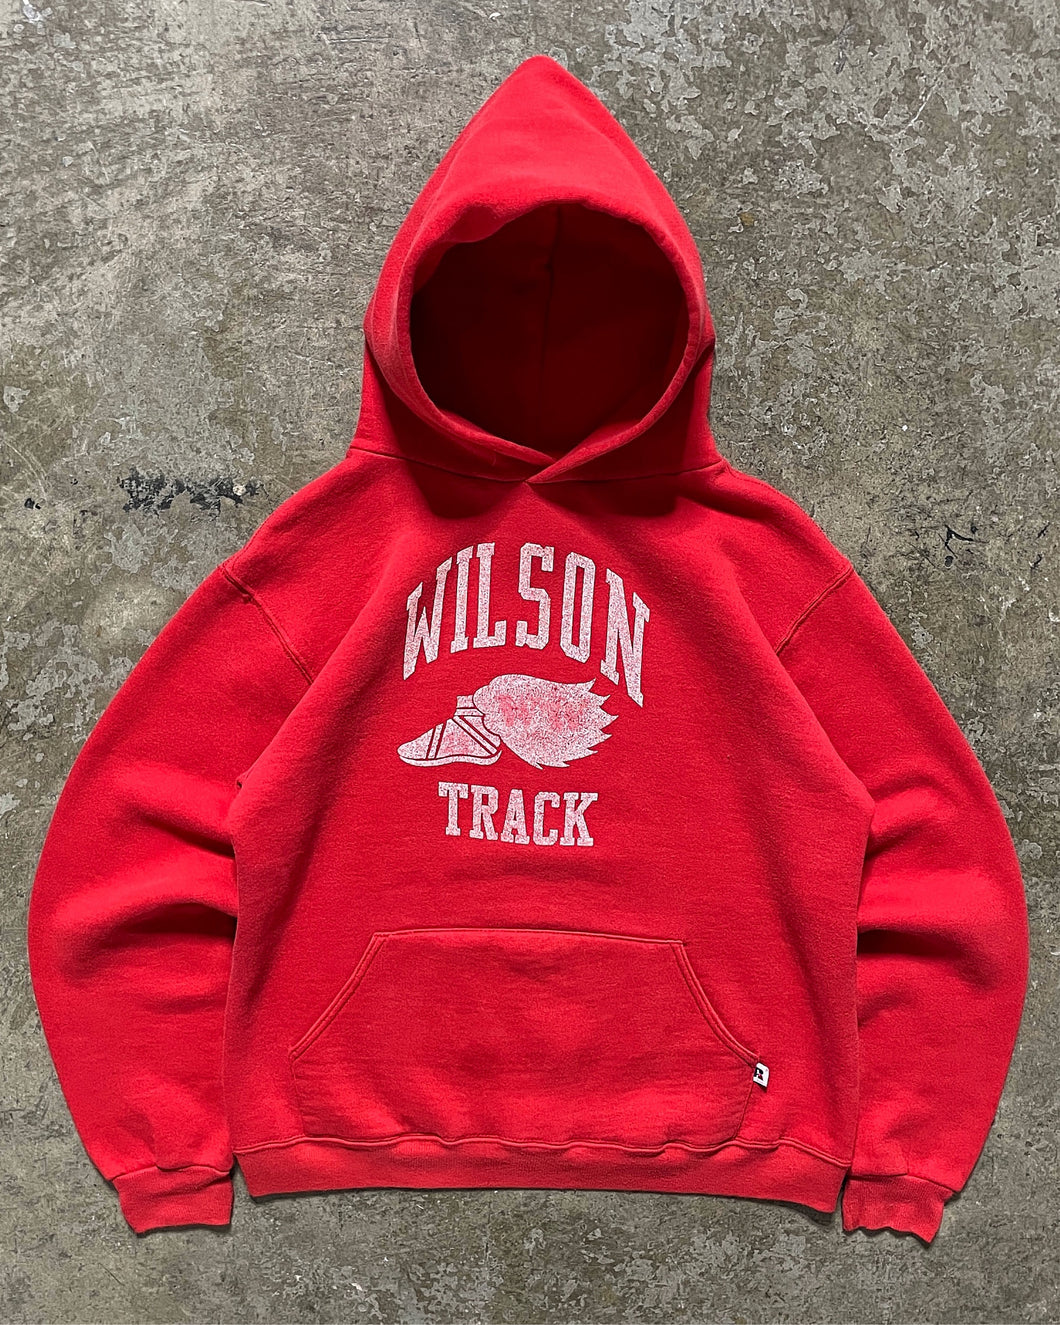 FADED RED “WILSON TRACK” RUSSELL HOODIE - 1980S